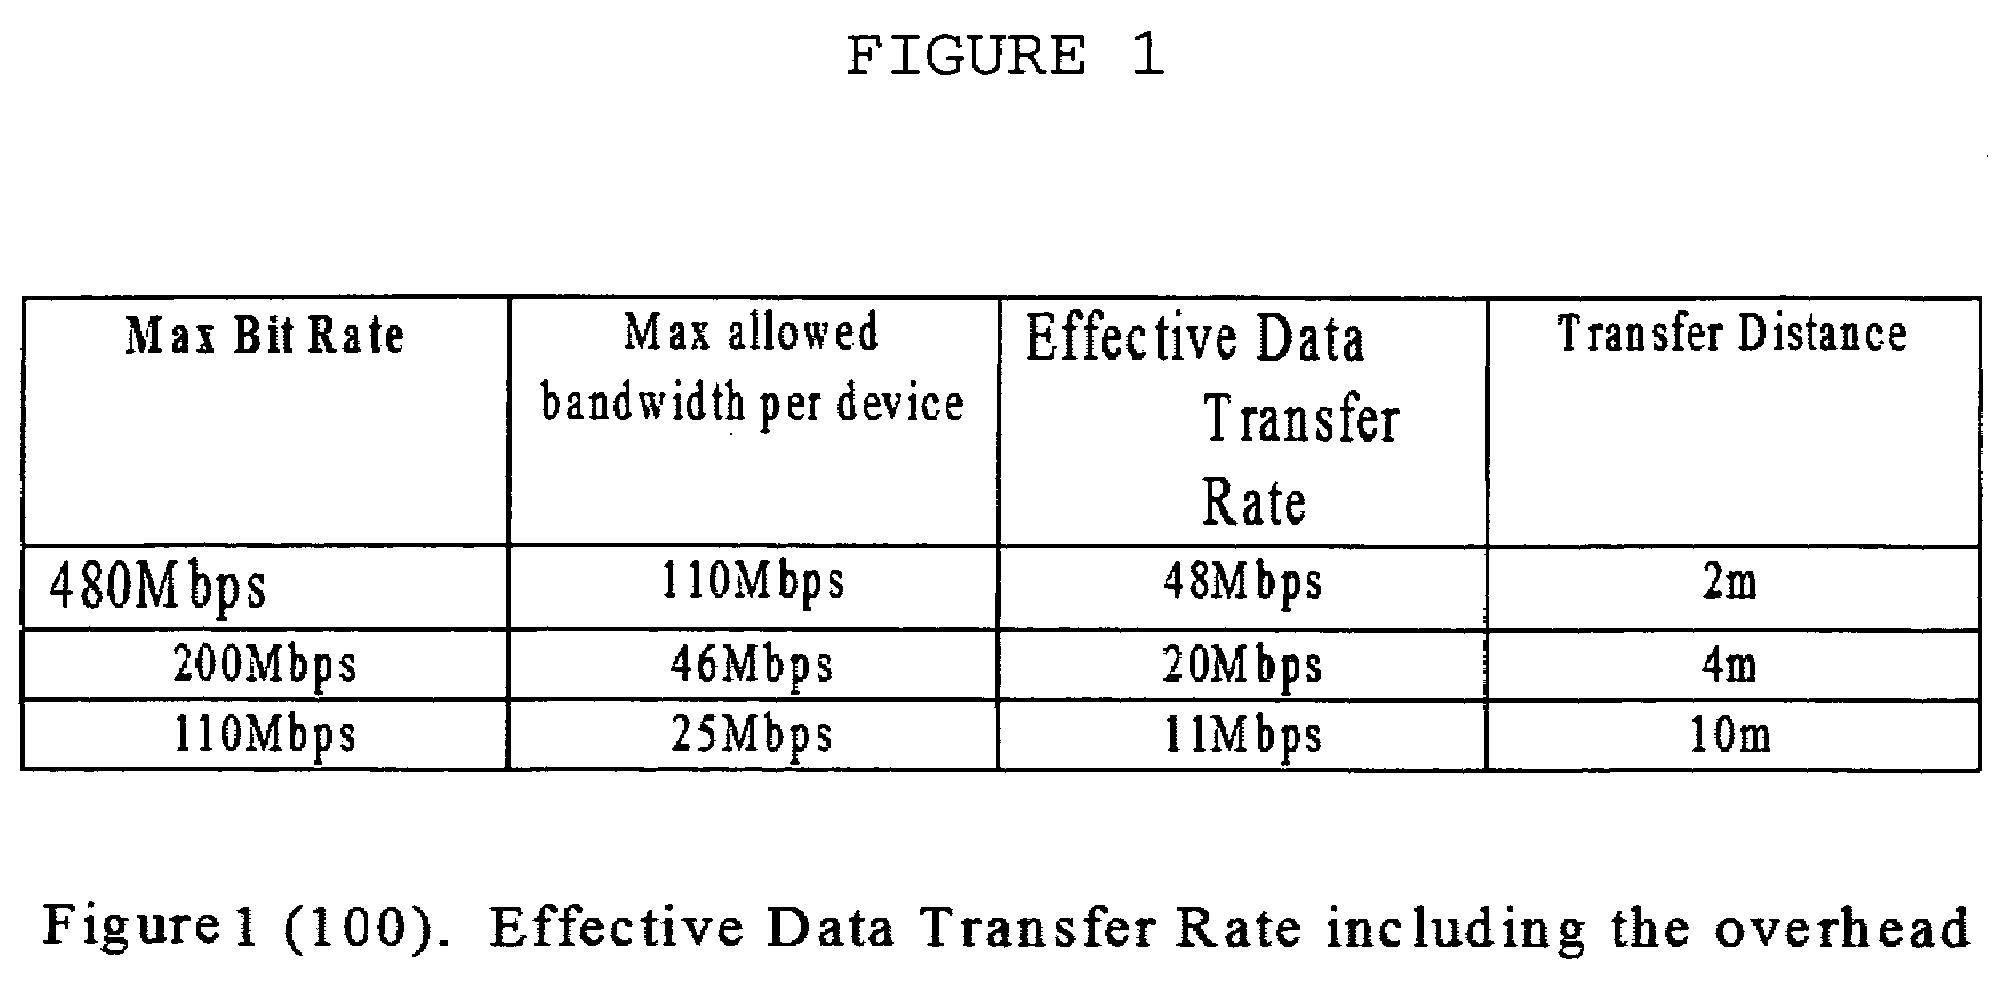 Wireless QoS by hardware packet sizing, data rate modulation, and transmit power controlling based on the accumulated packet drop rate